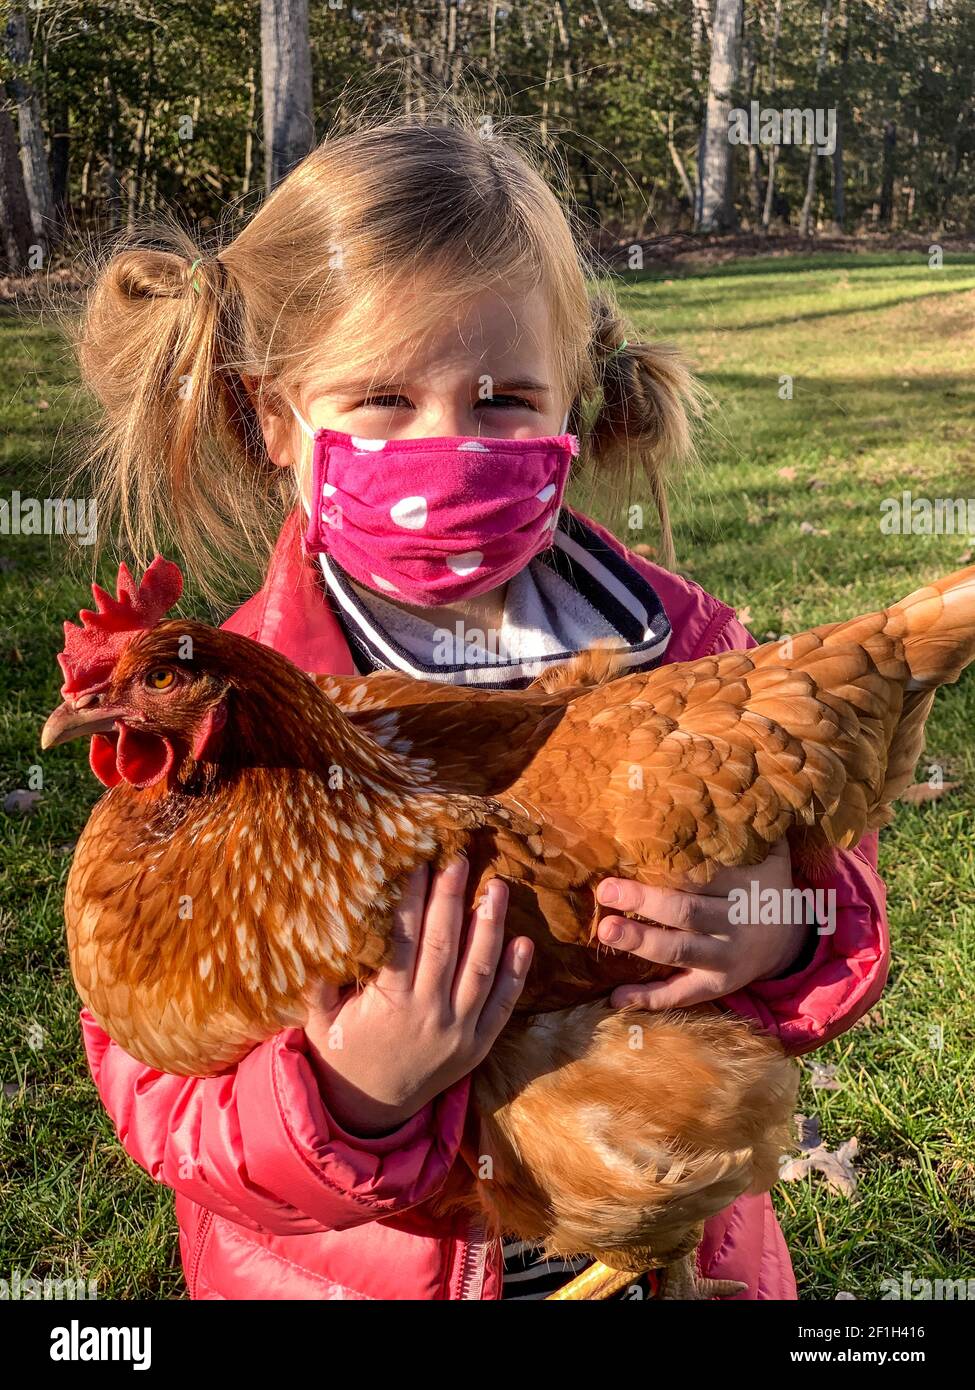 Little Girl with Face Mask Holding her Chicken During COVID-19 Pandemic. Leonardtown, Maryland. Stock Photo